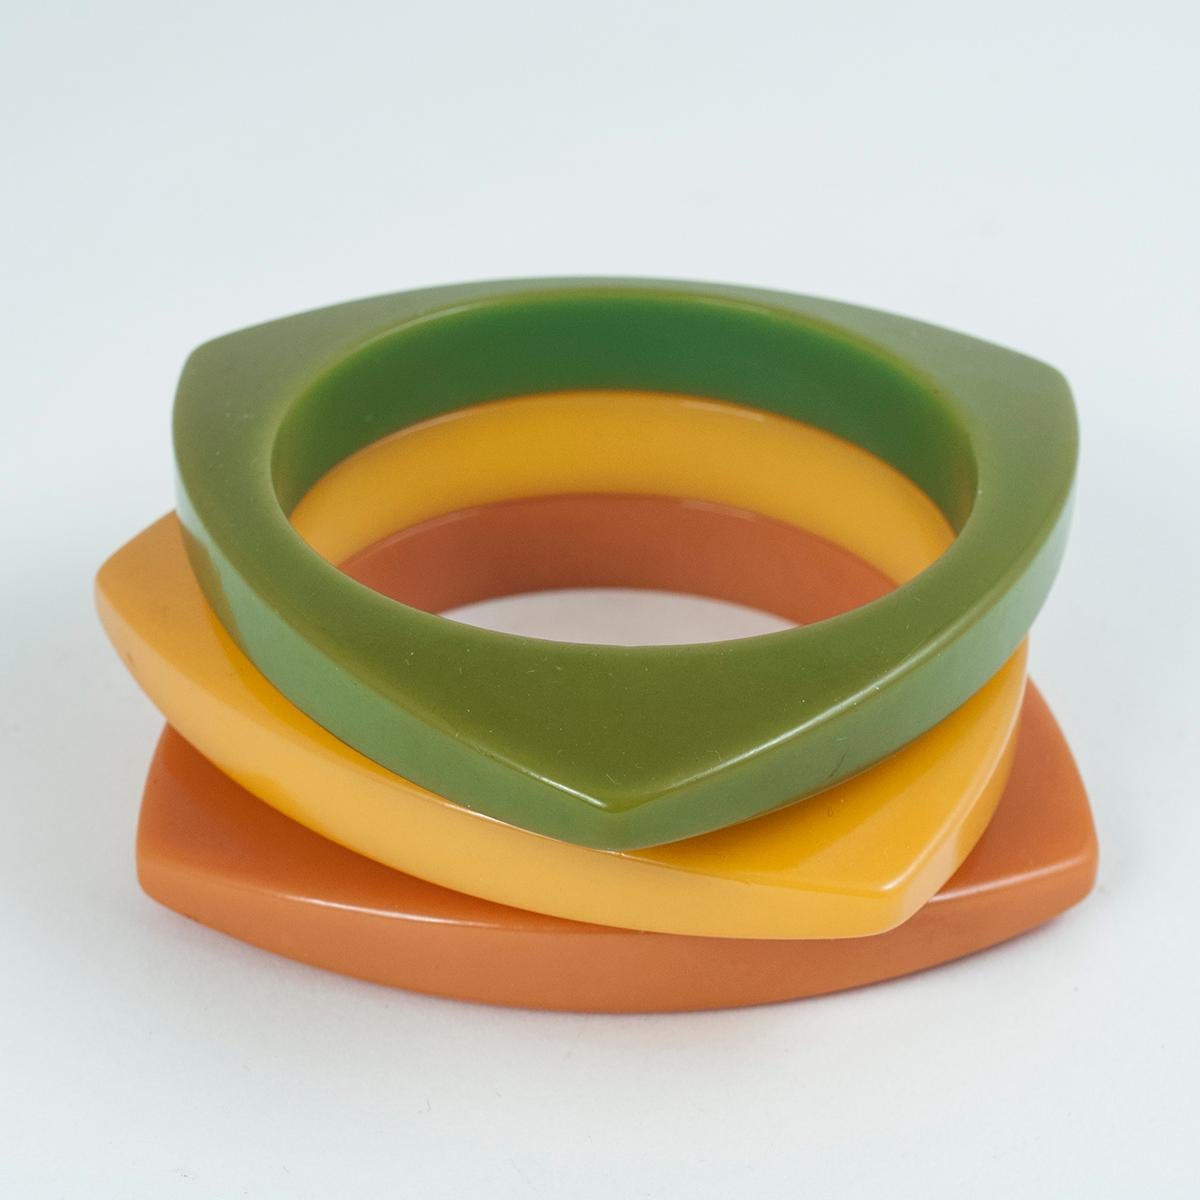 Three early to mid-20th century Bakelite bangle bracelets

A trio of triangular bakelite bangles in avocado, mustard and mango, with beautiful patina from age and use. They measure 8